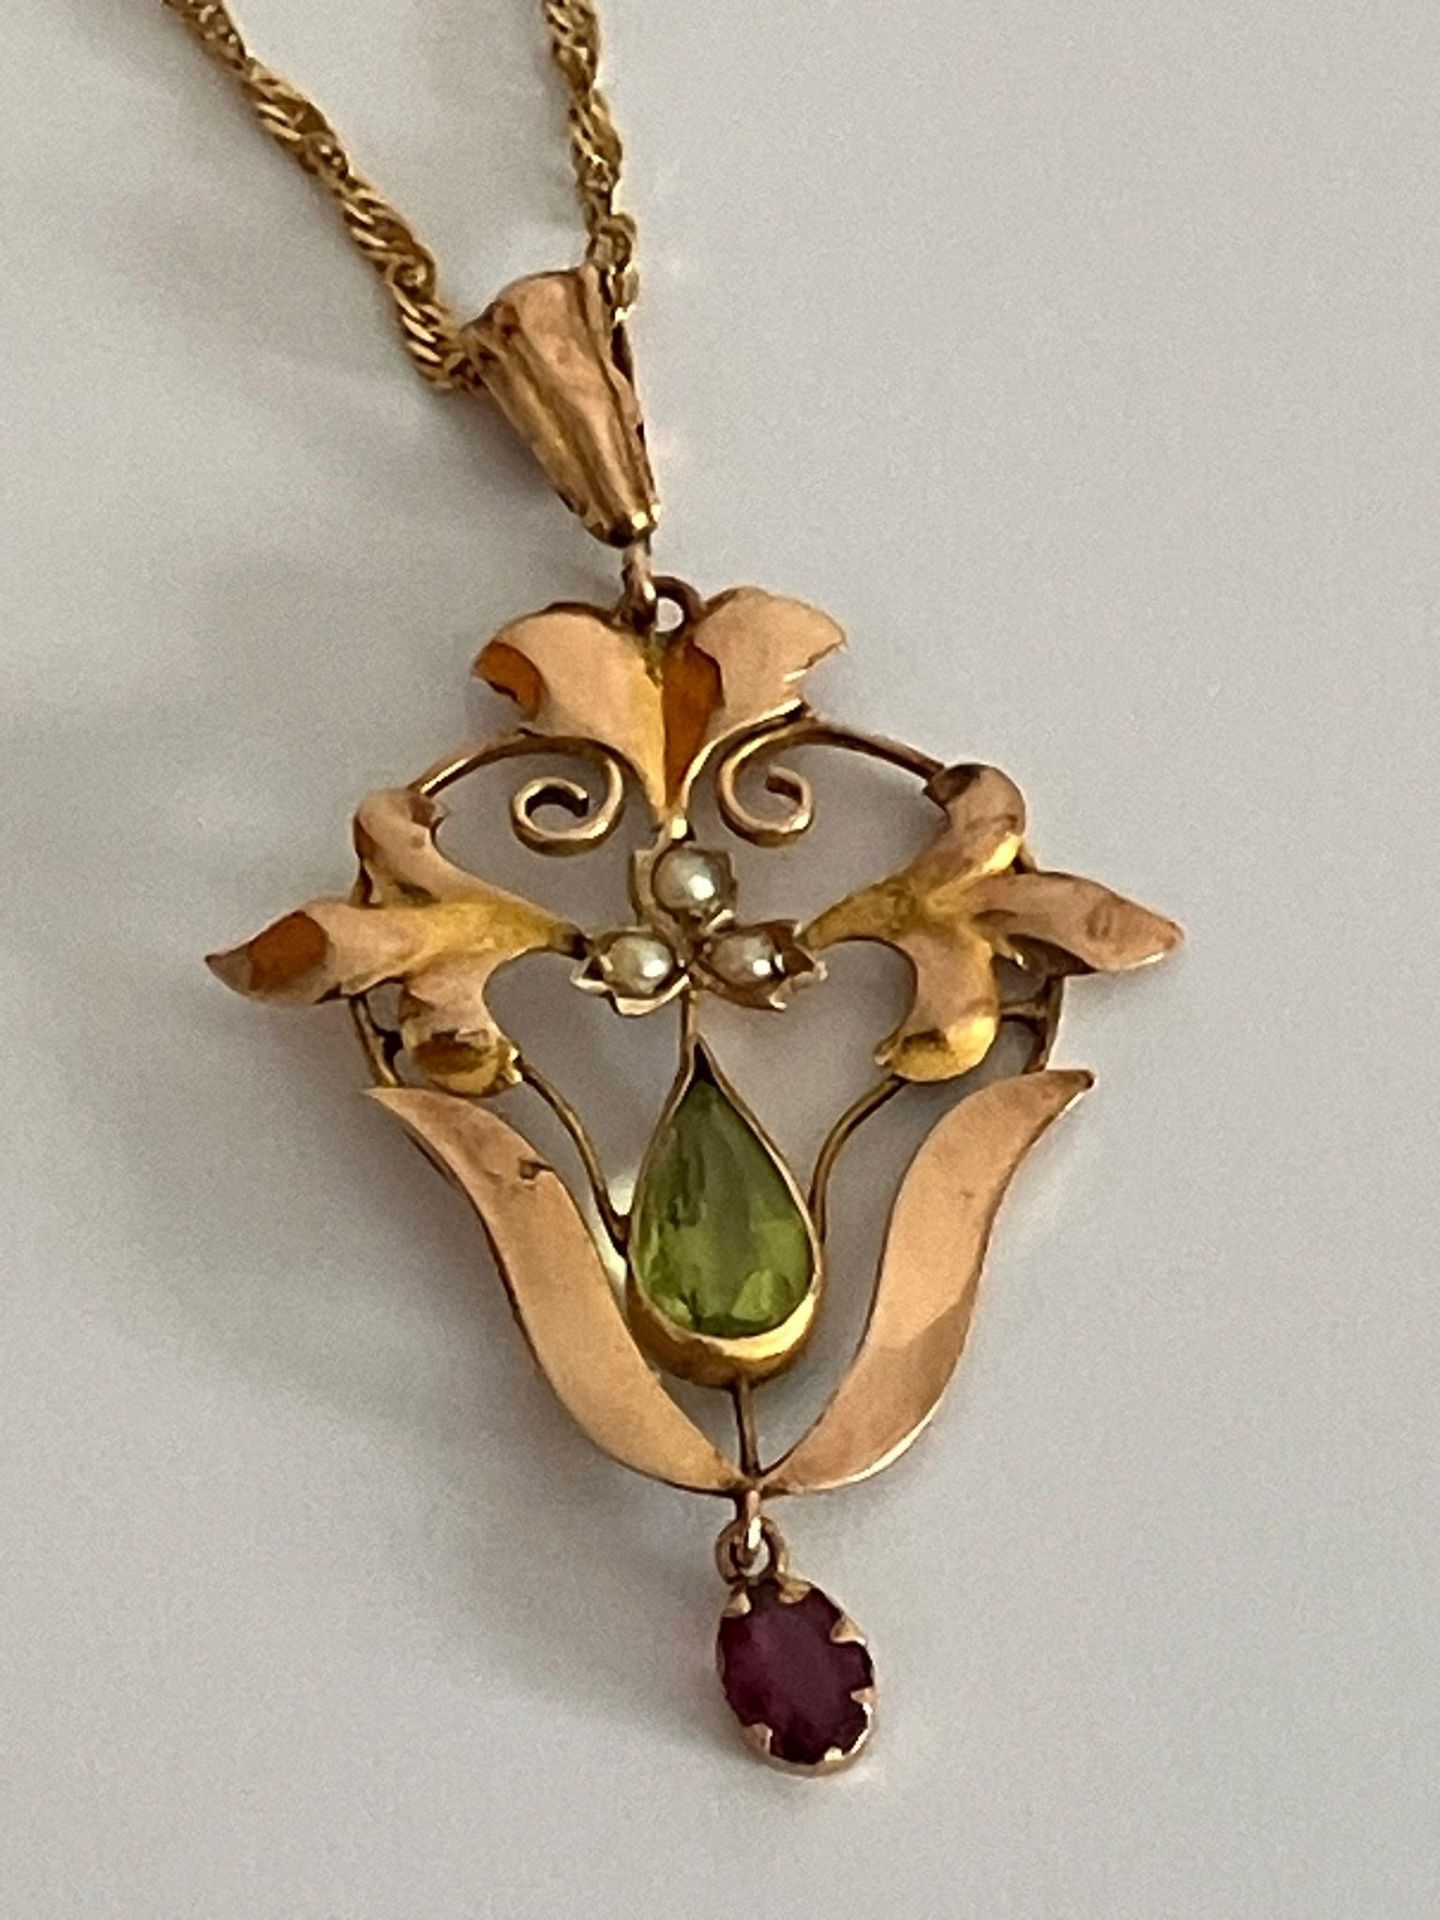 Antique 9 carat GOLD PENDANT set with PERIDOT,GARNET, and SEED PEARL detail, mounted on a 9 carat - Bild 3 aus 3